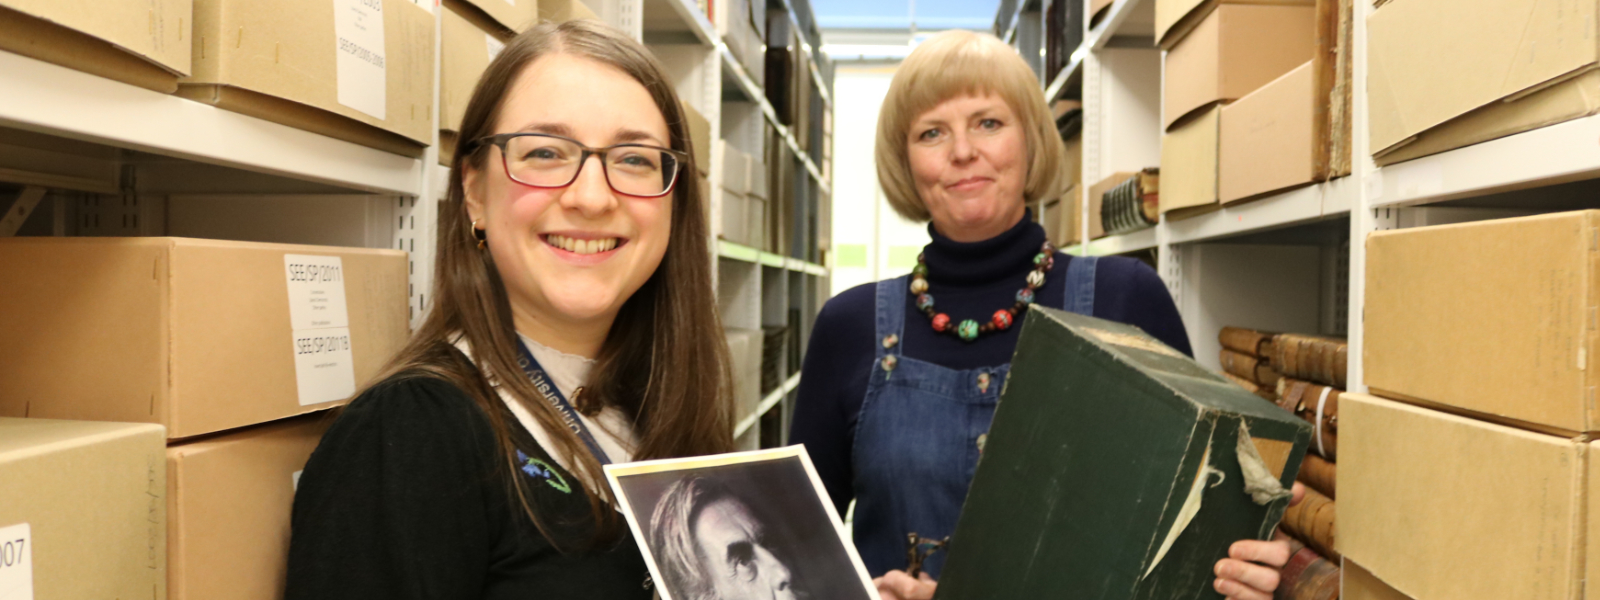 Rachael Jones, Assistant Archivist at the University of Strathclyde Library's Archives & Special Collections, and Dr Eleanor Bell, Senior Lecturer in English at the University of Strathclyde stand side by side holding the box which contained the long-lost manuscript recently discovered